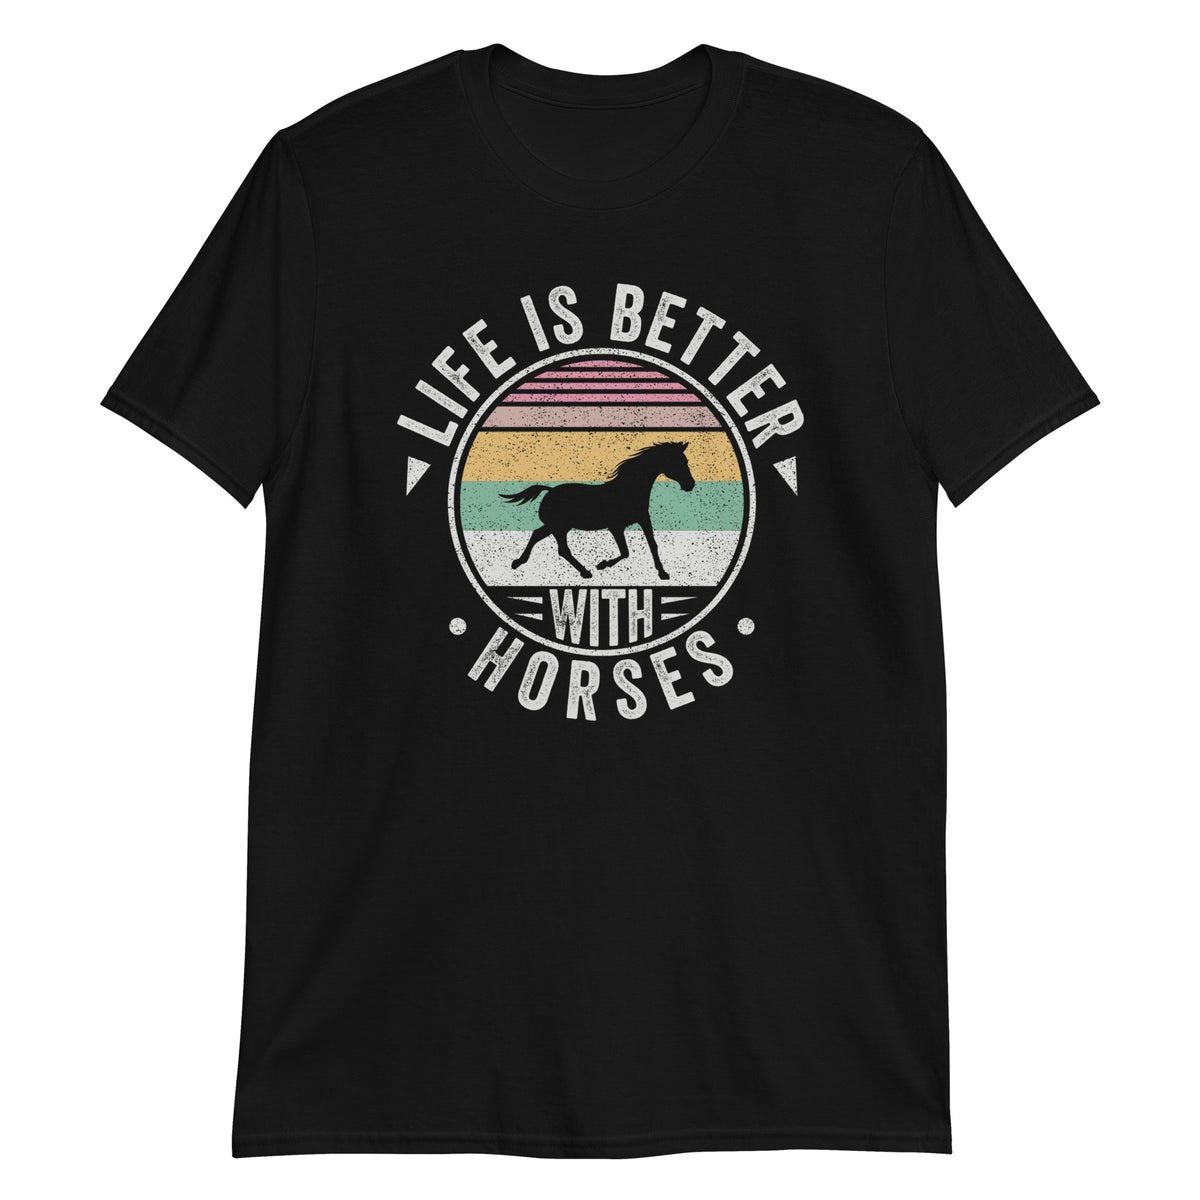 Life is Better With Horses T-Shirt